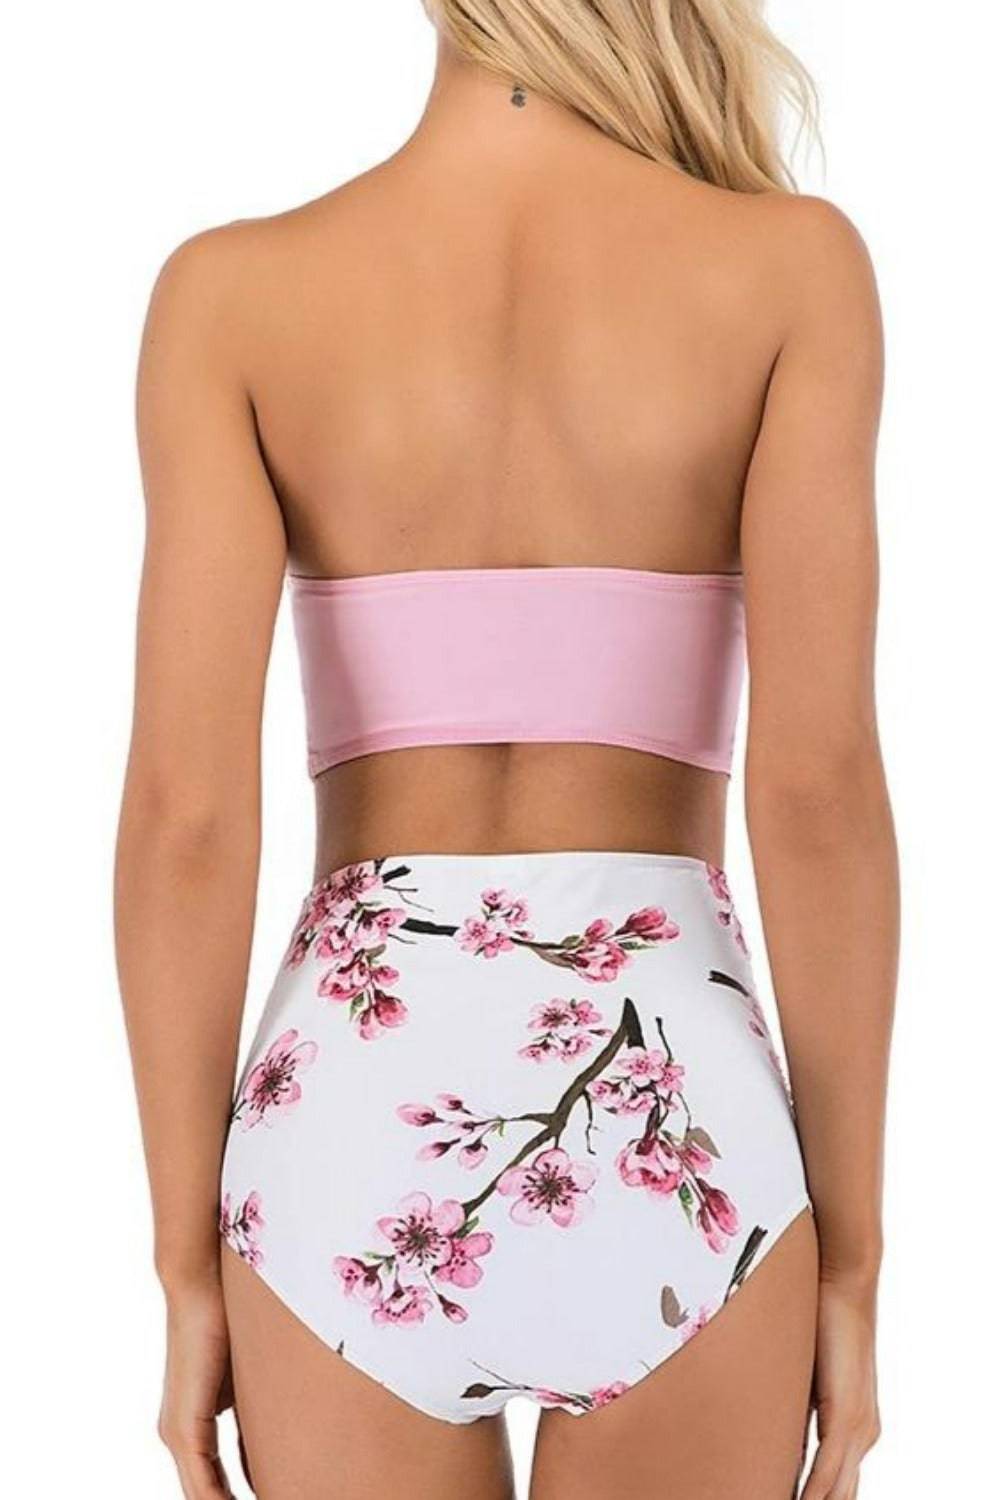 Pink Floral Bikini High Waisted Bustier Bra Two-Piece Swimsuit - TGC Boutique - Swimsuit